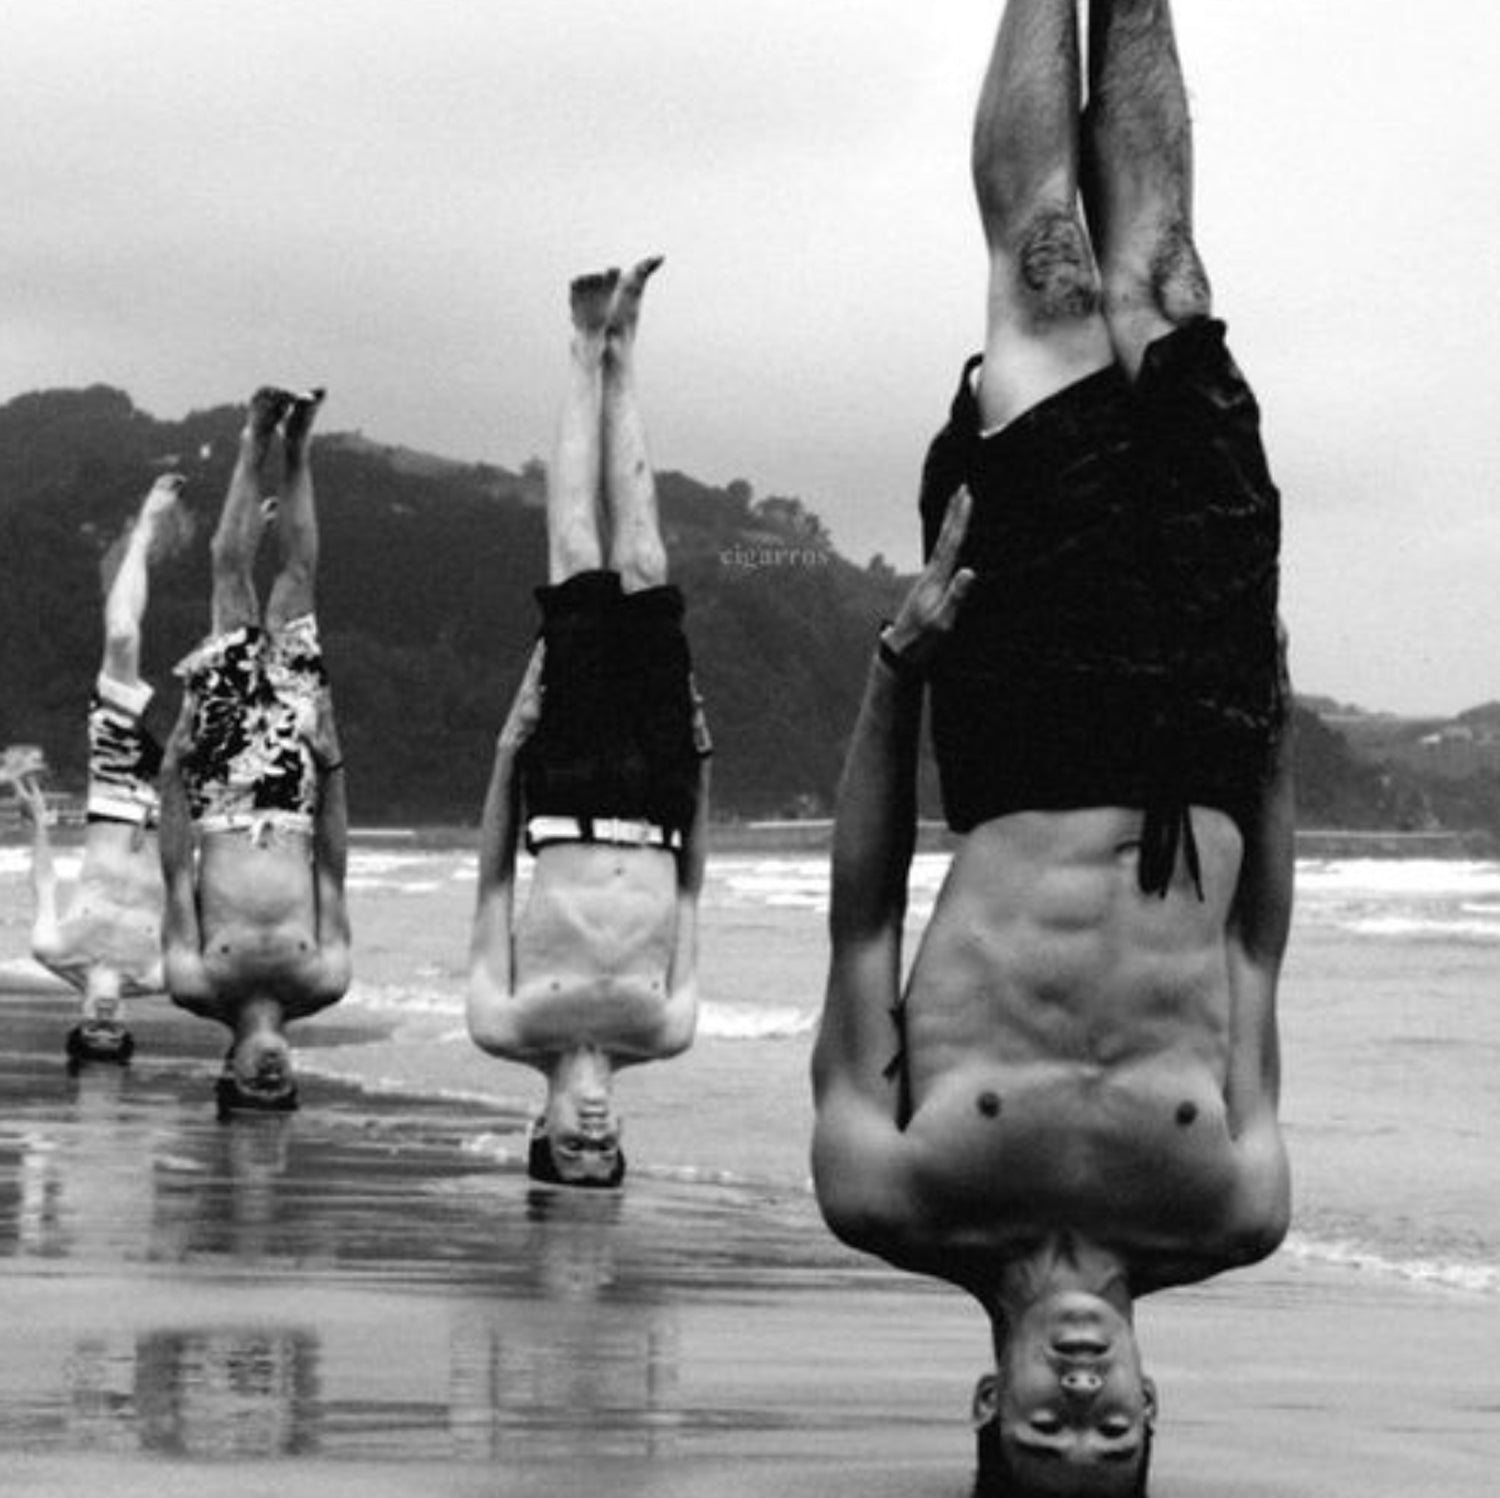 Inversion Basics: How to Master the Headstand